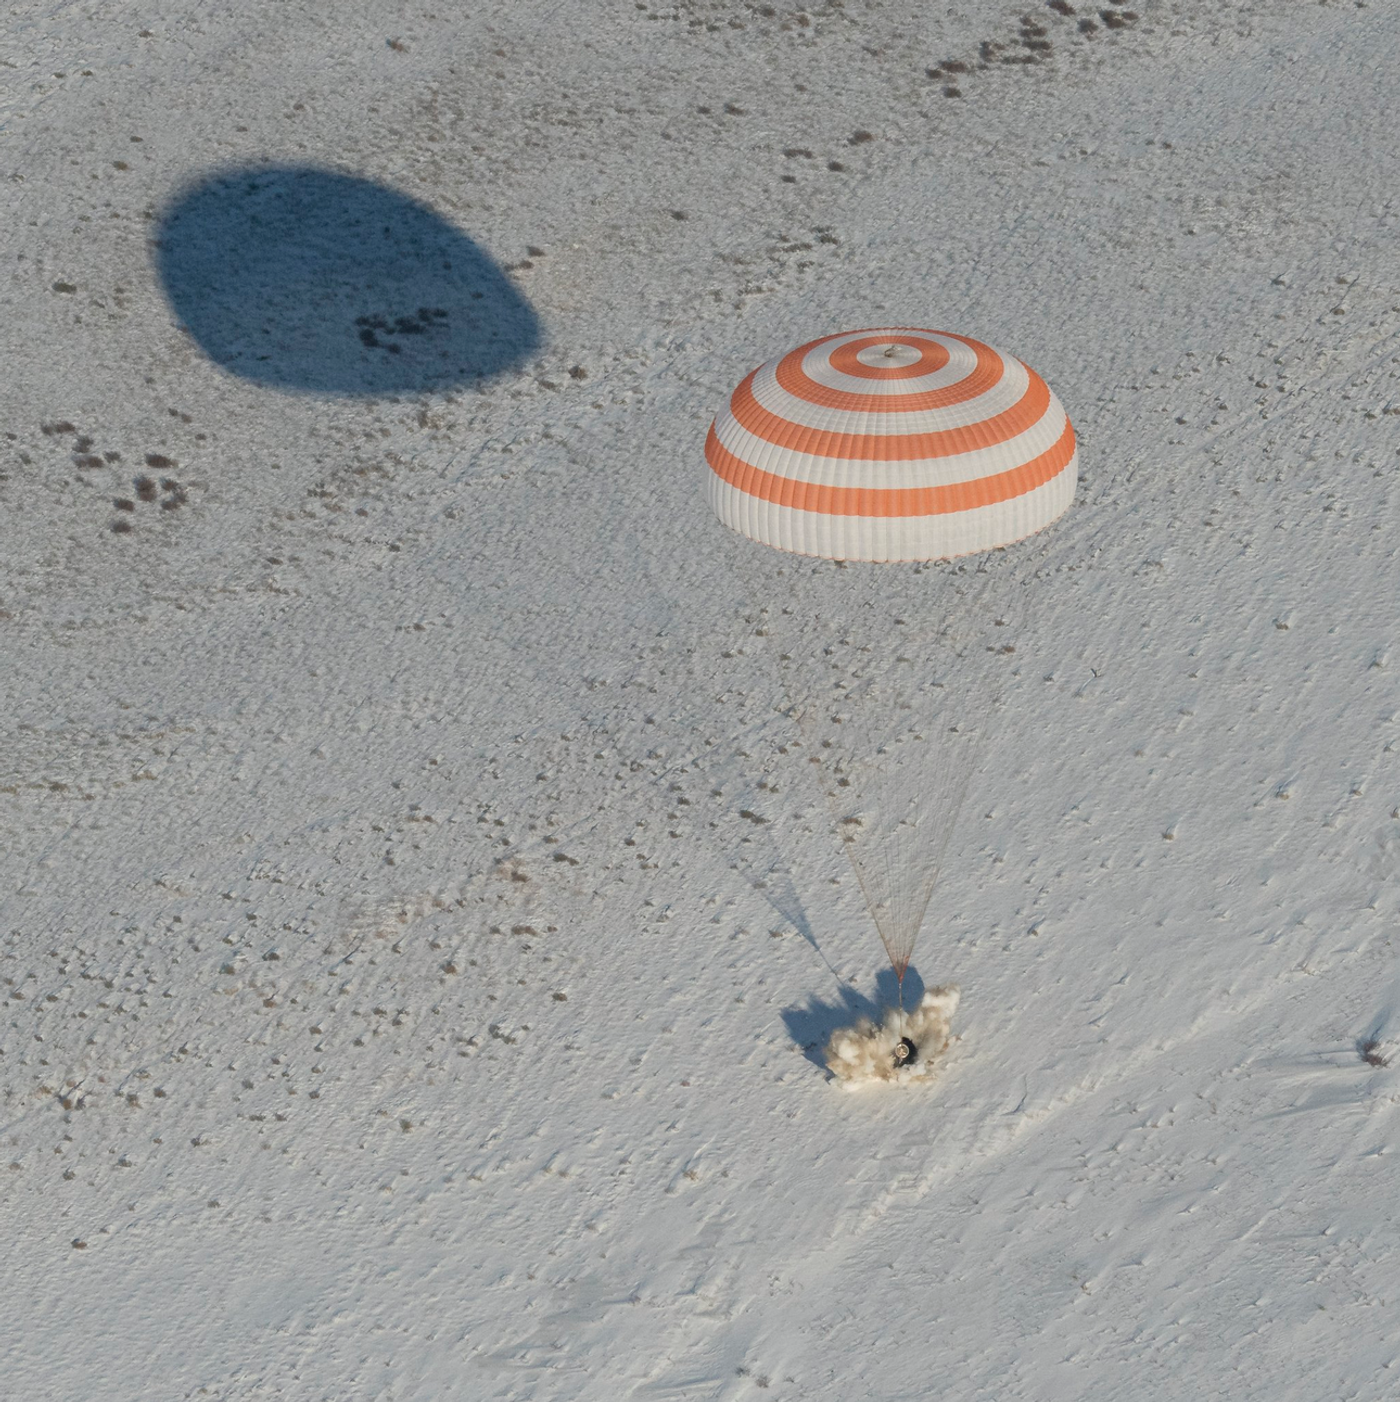 The Soyuz spacecraft touches down in Kazakhstan with three ISS crew members on Thursday.